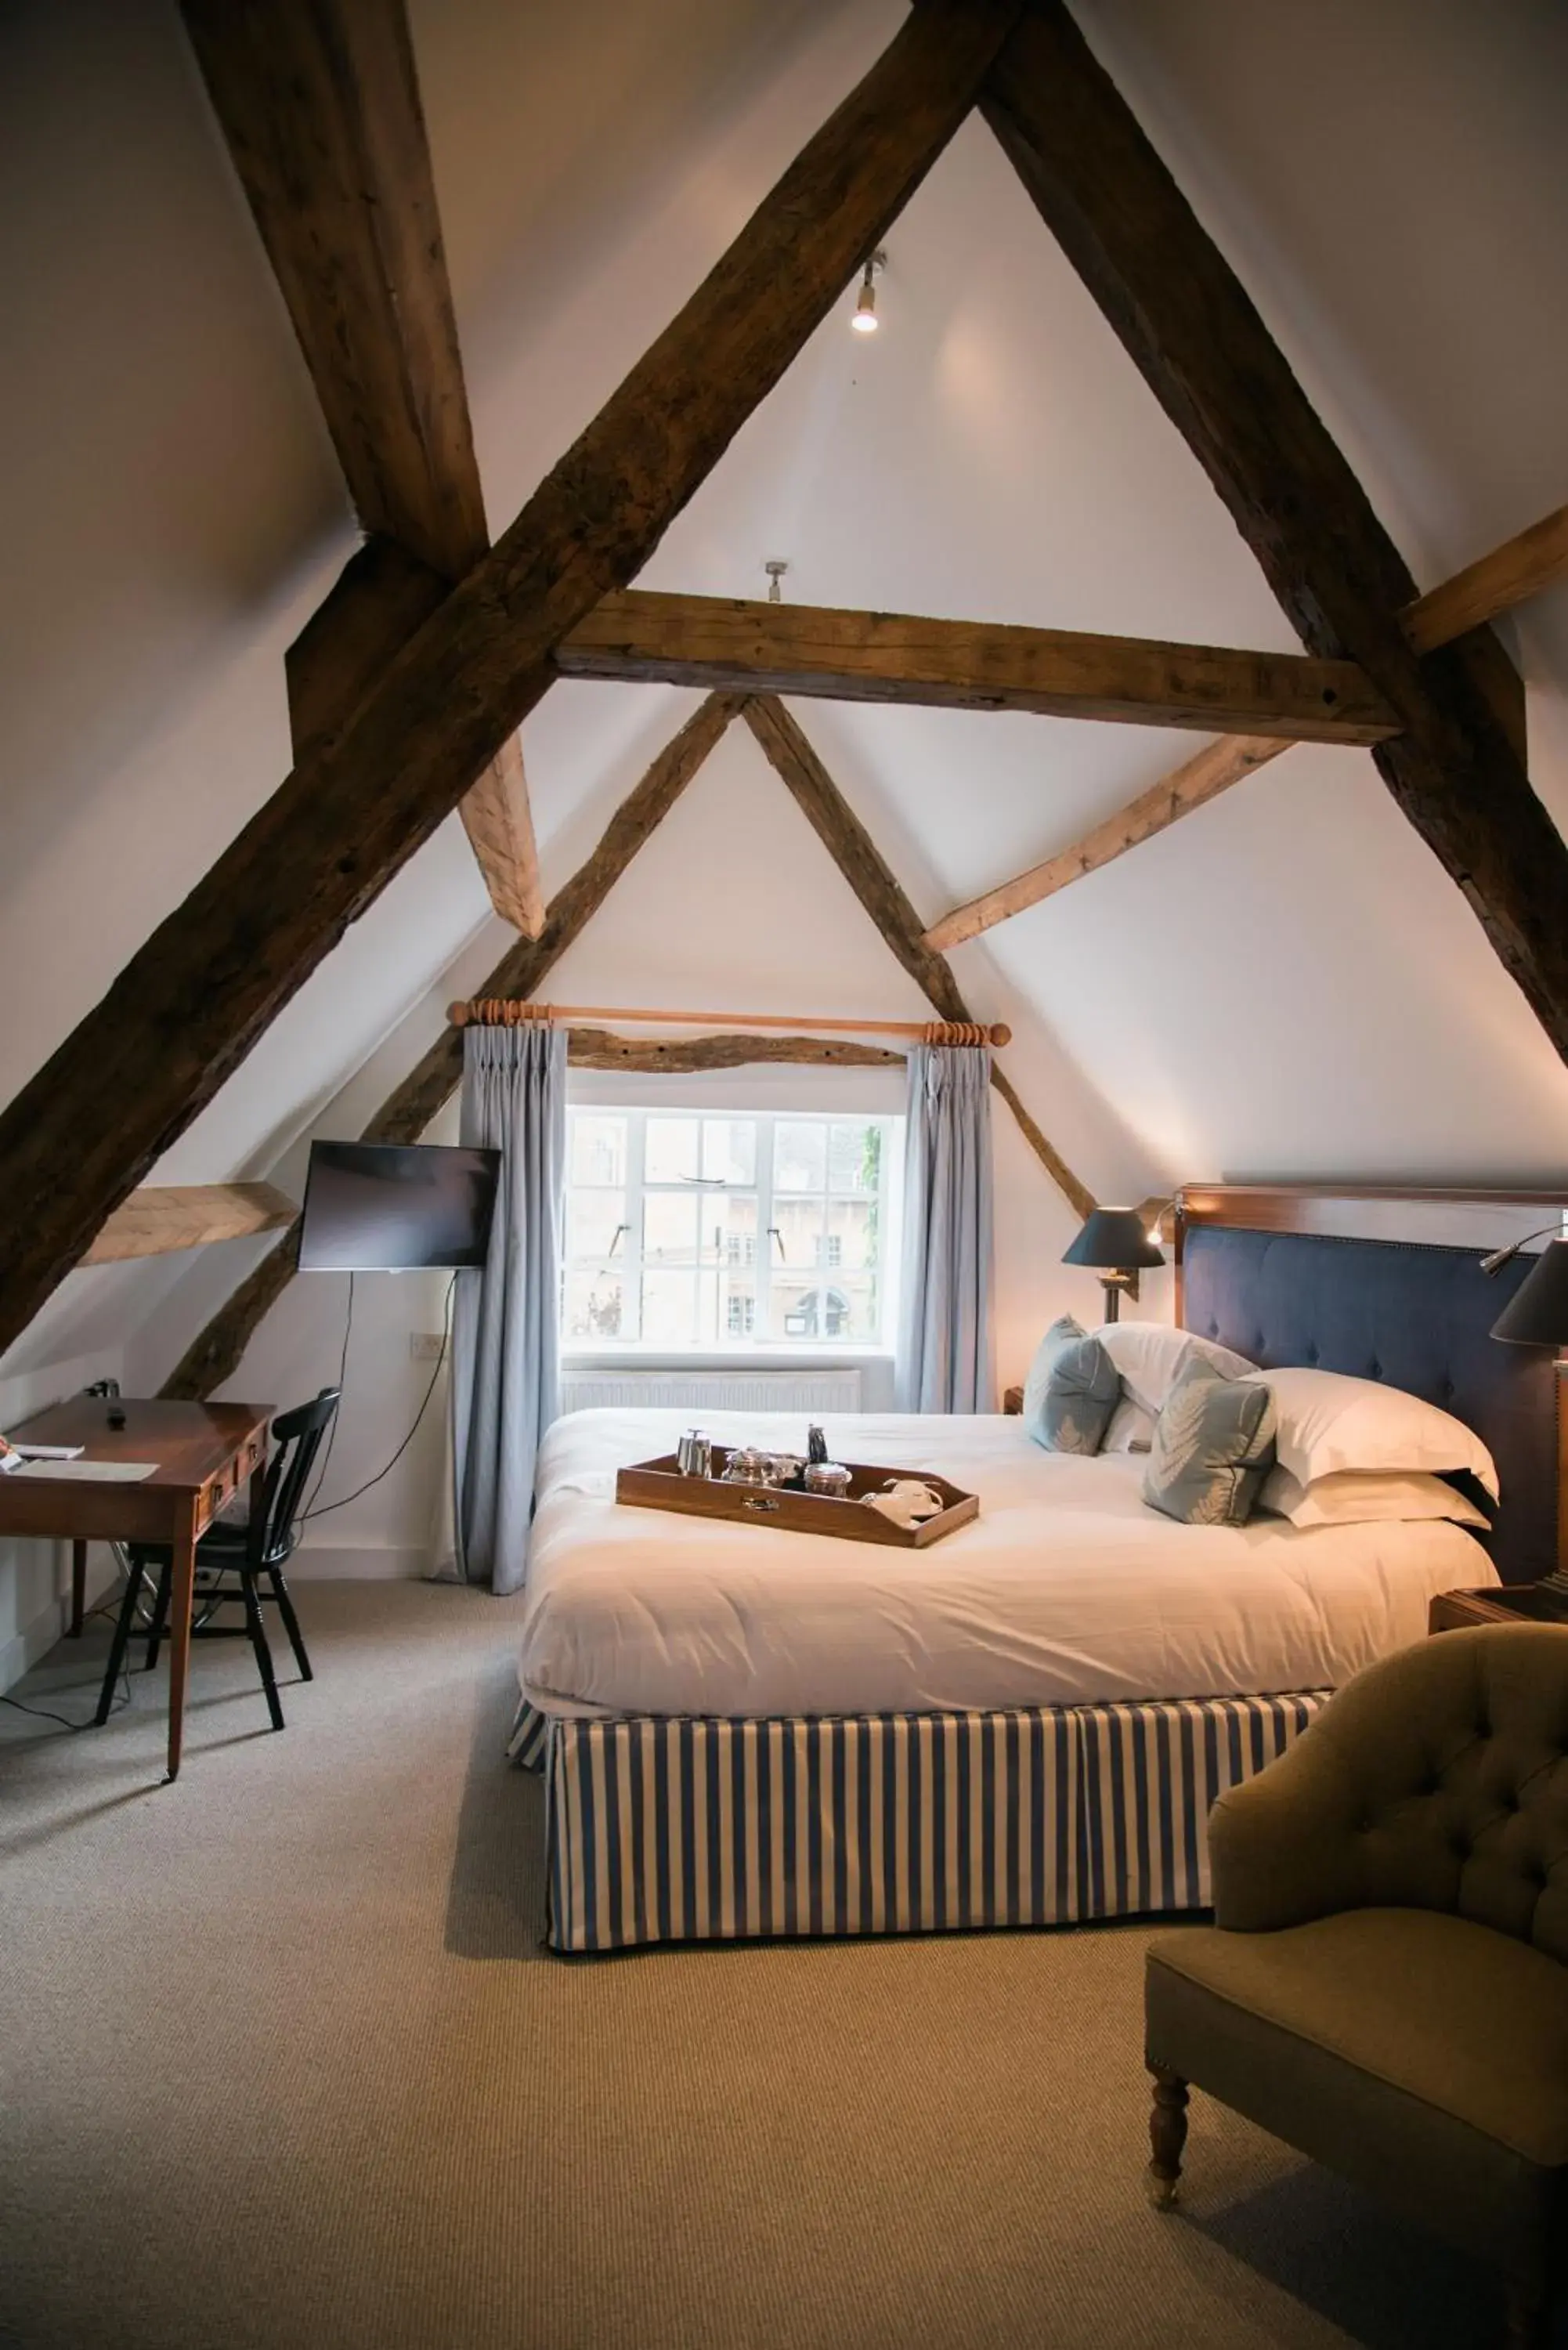 Bedroom in Cotswold House Hotel and Spa - "A Bespoke Hotel"